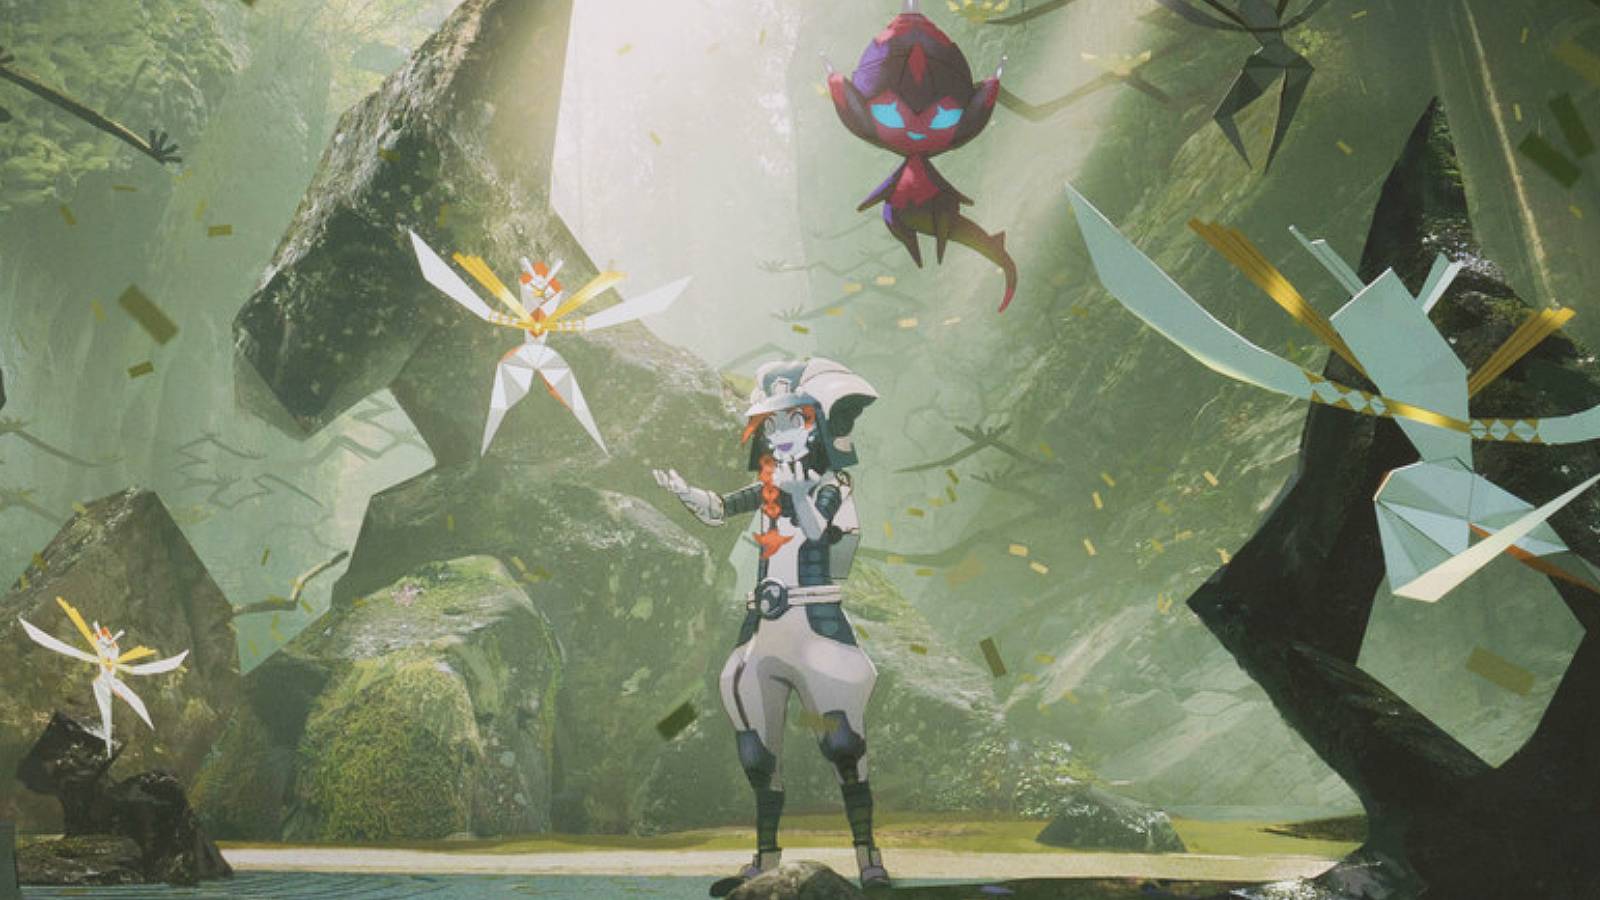 Key art shows a Pokemon character surrounded by Ultra Beasts